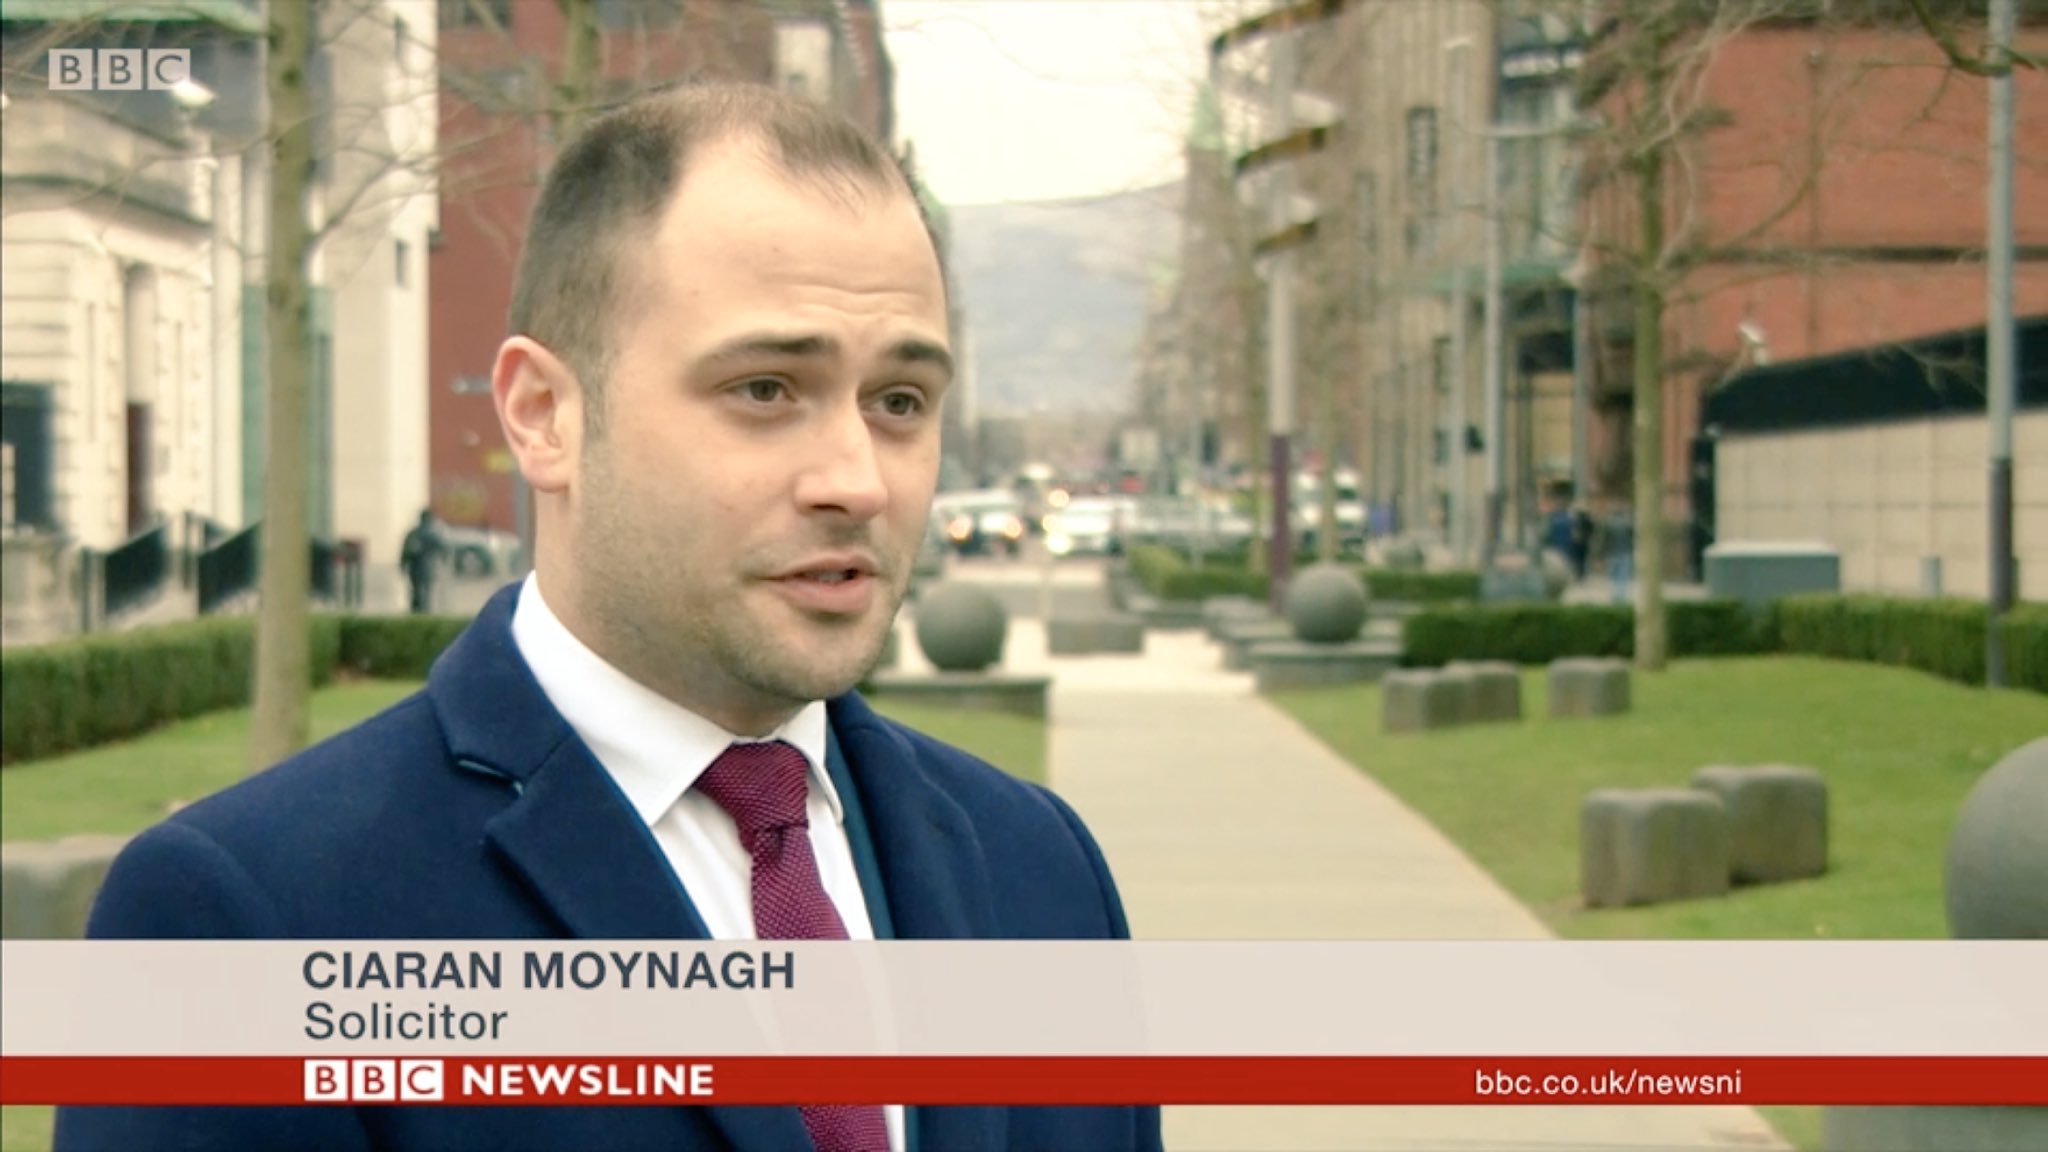 Ciaran Moynagh ⚖ on Twitter: "Spoke to @bbcnewsline this morn on the issue  of #jurors disclosing info on deliberations and potential for #contempt of  court proceedings. https://t.co/dHD6SsxTZm" / Twitter